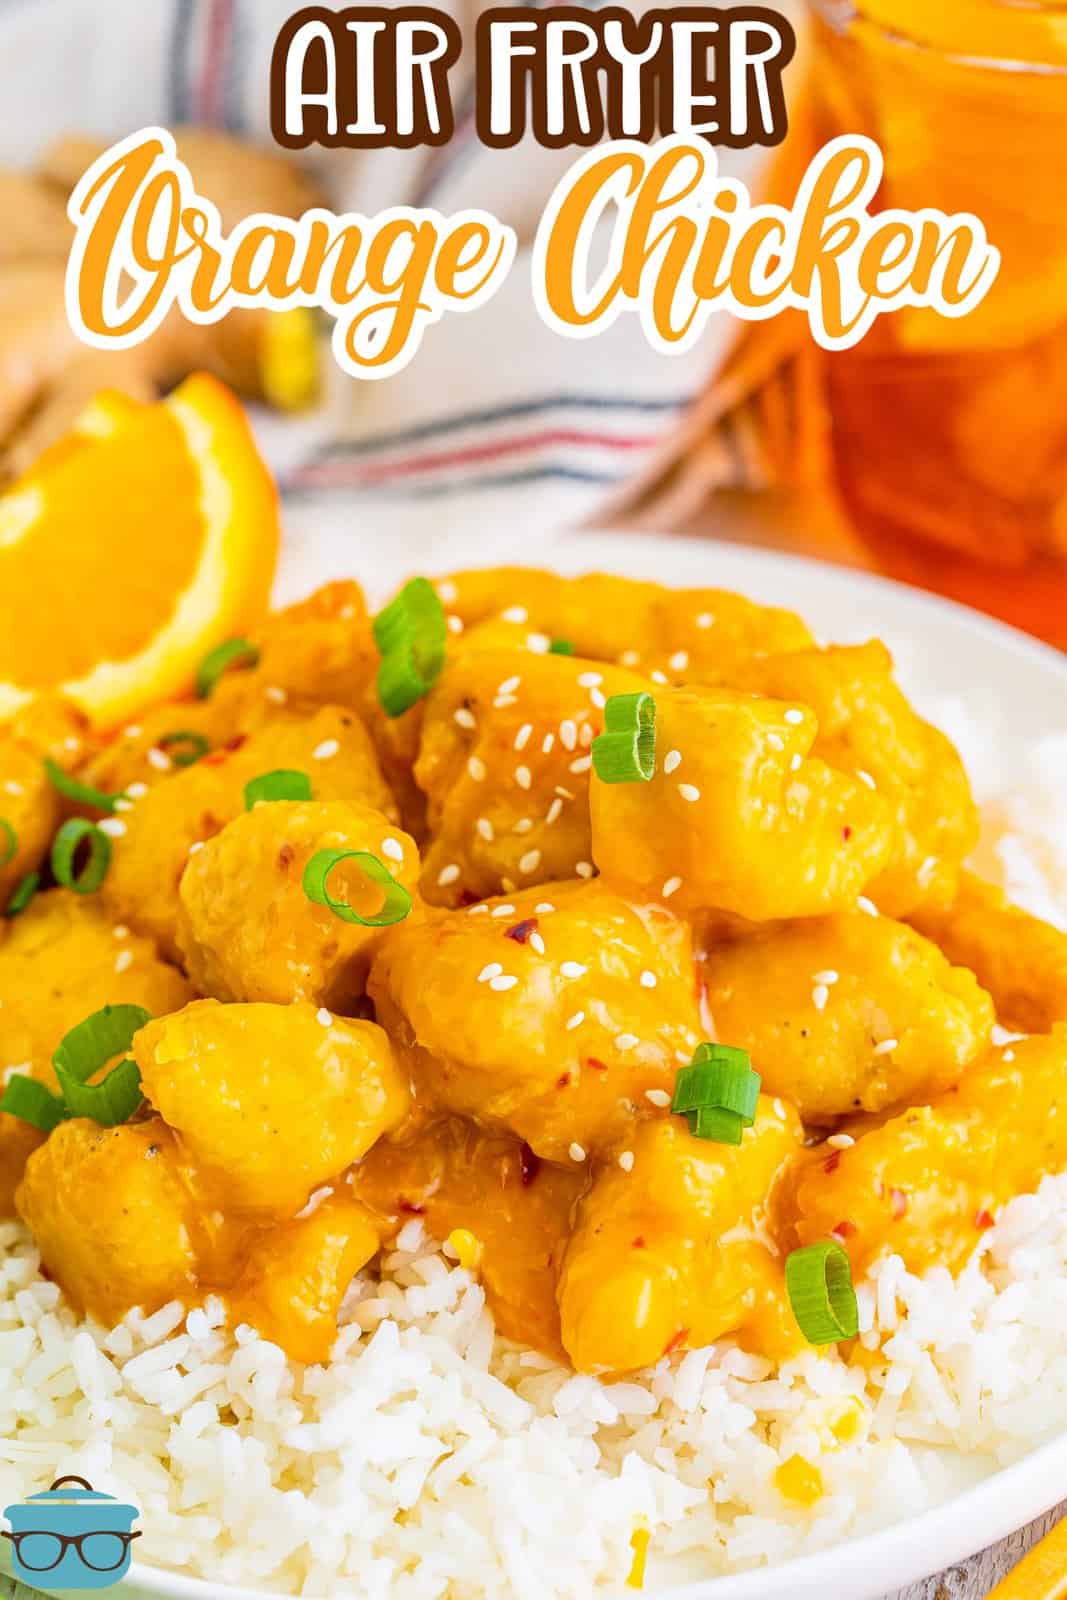 pieces of orange chicken shown in white rice with a slice of fresh orange on the side.